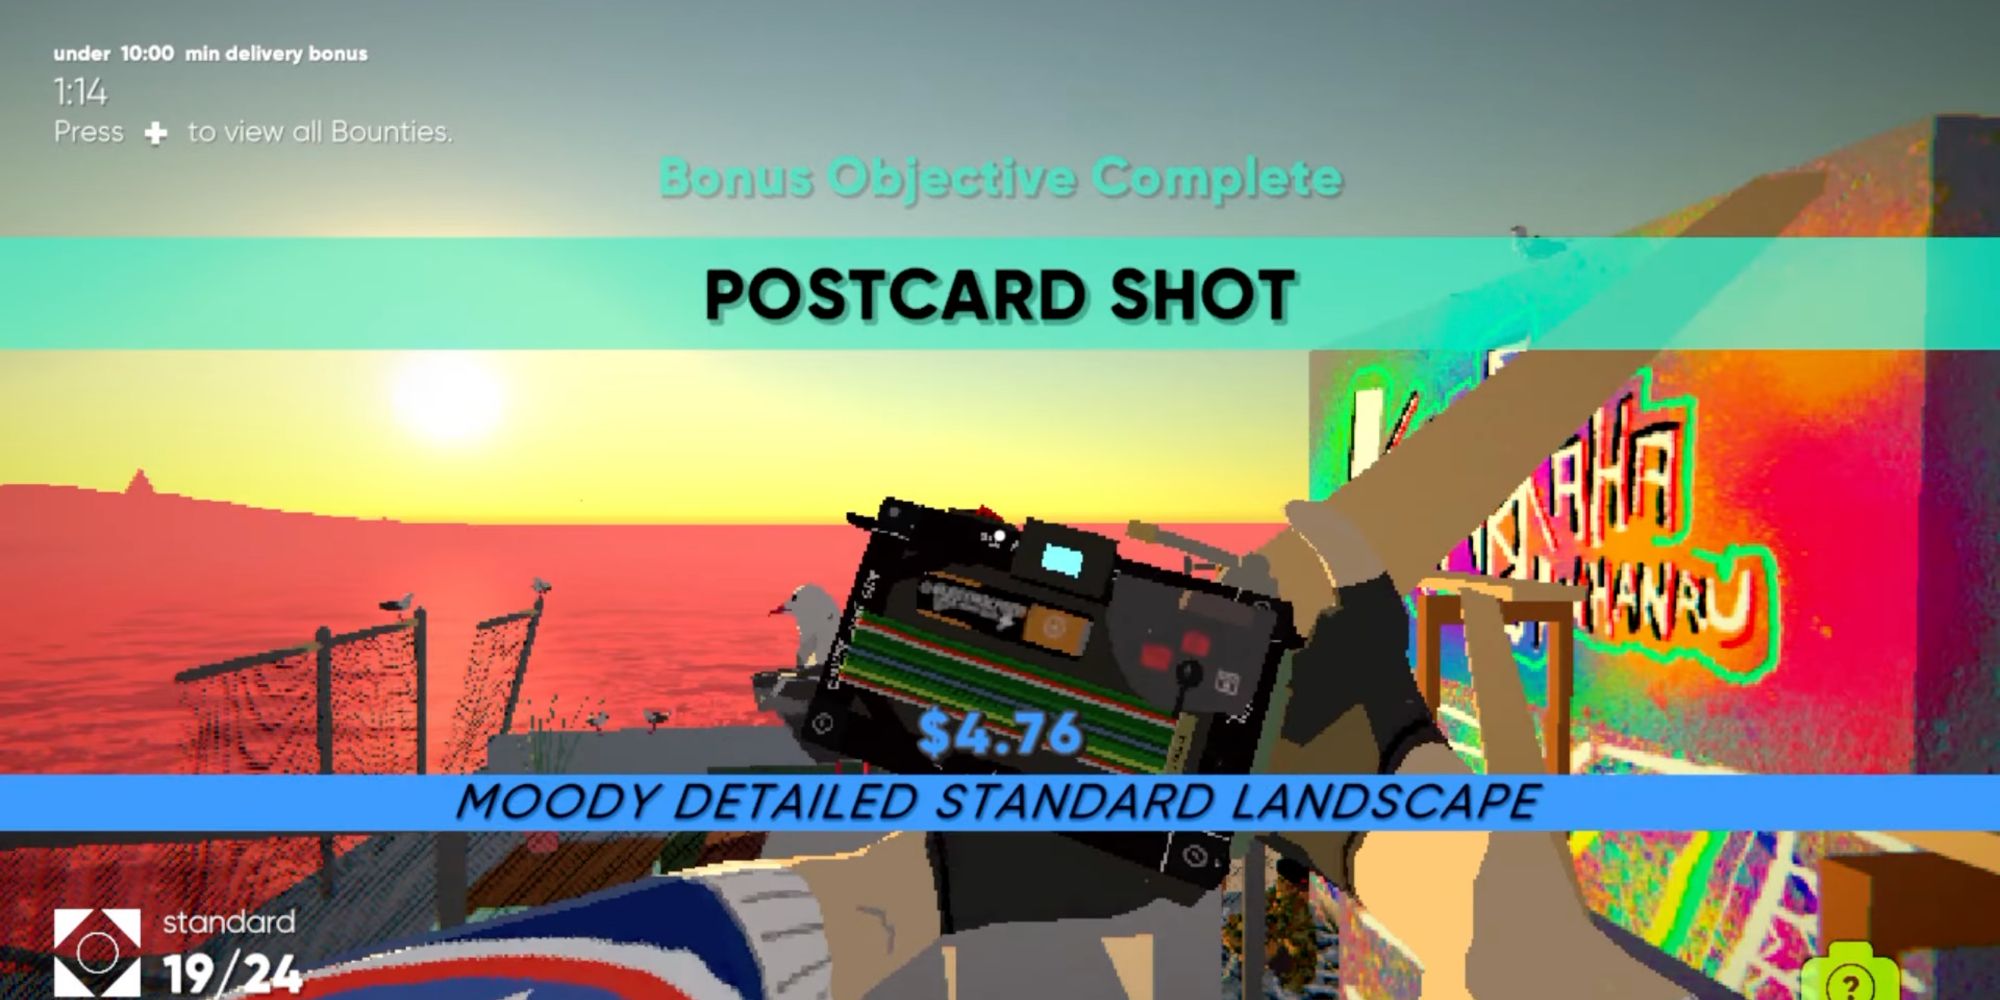 A player completes a bonus objective in Umurangi Generation by recreating a postcard photo of a red sunset